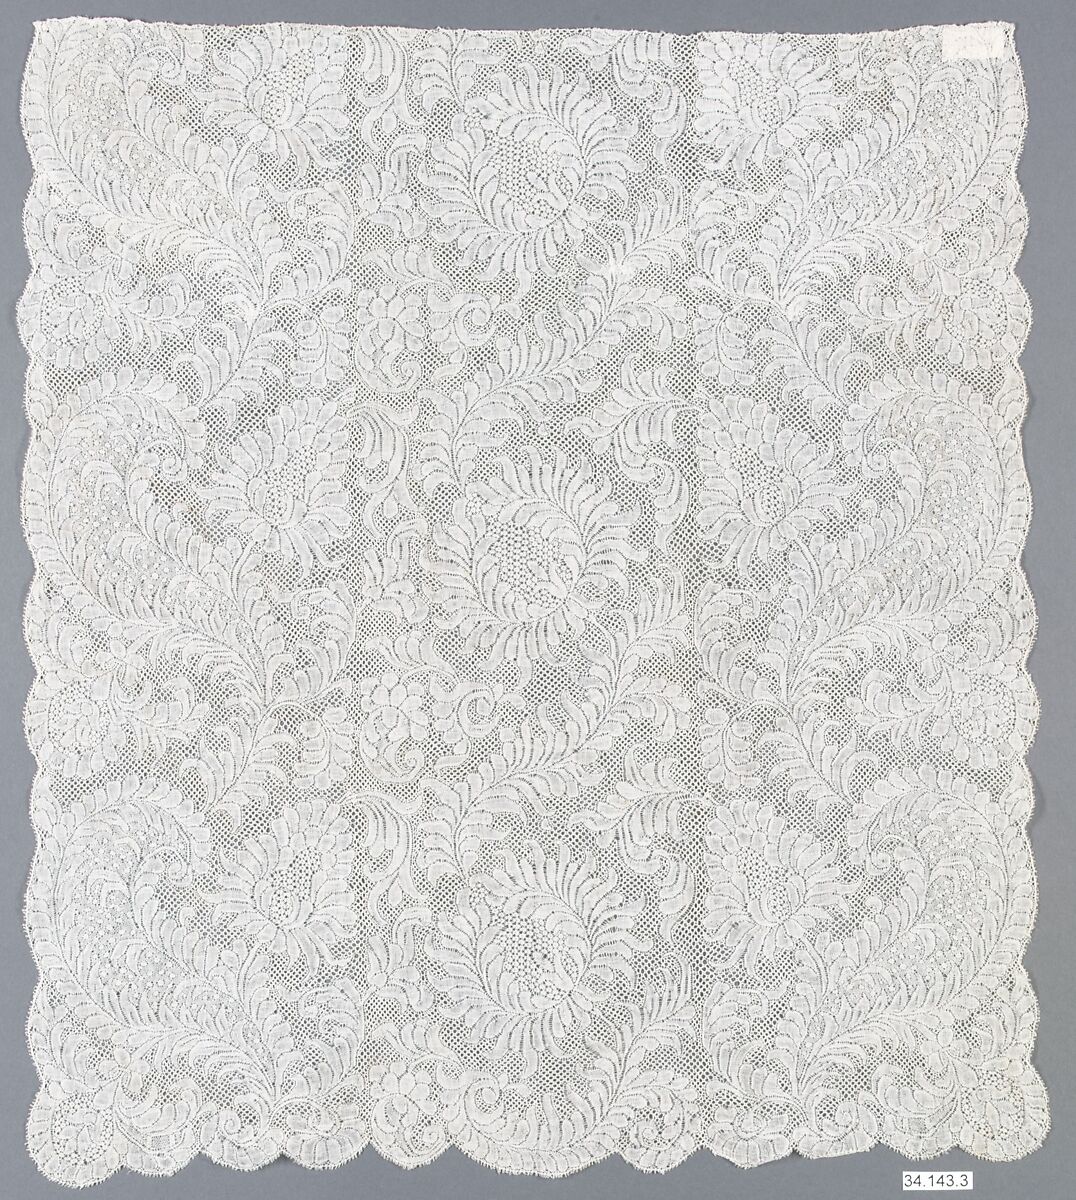 Cravat (one of a pair), Bobbin lace, French 